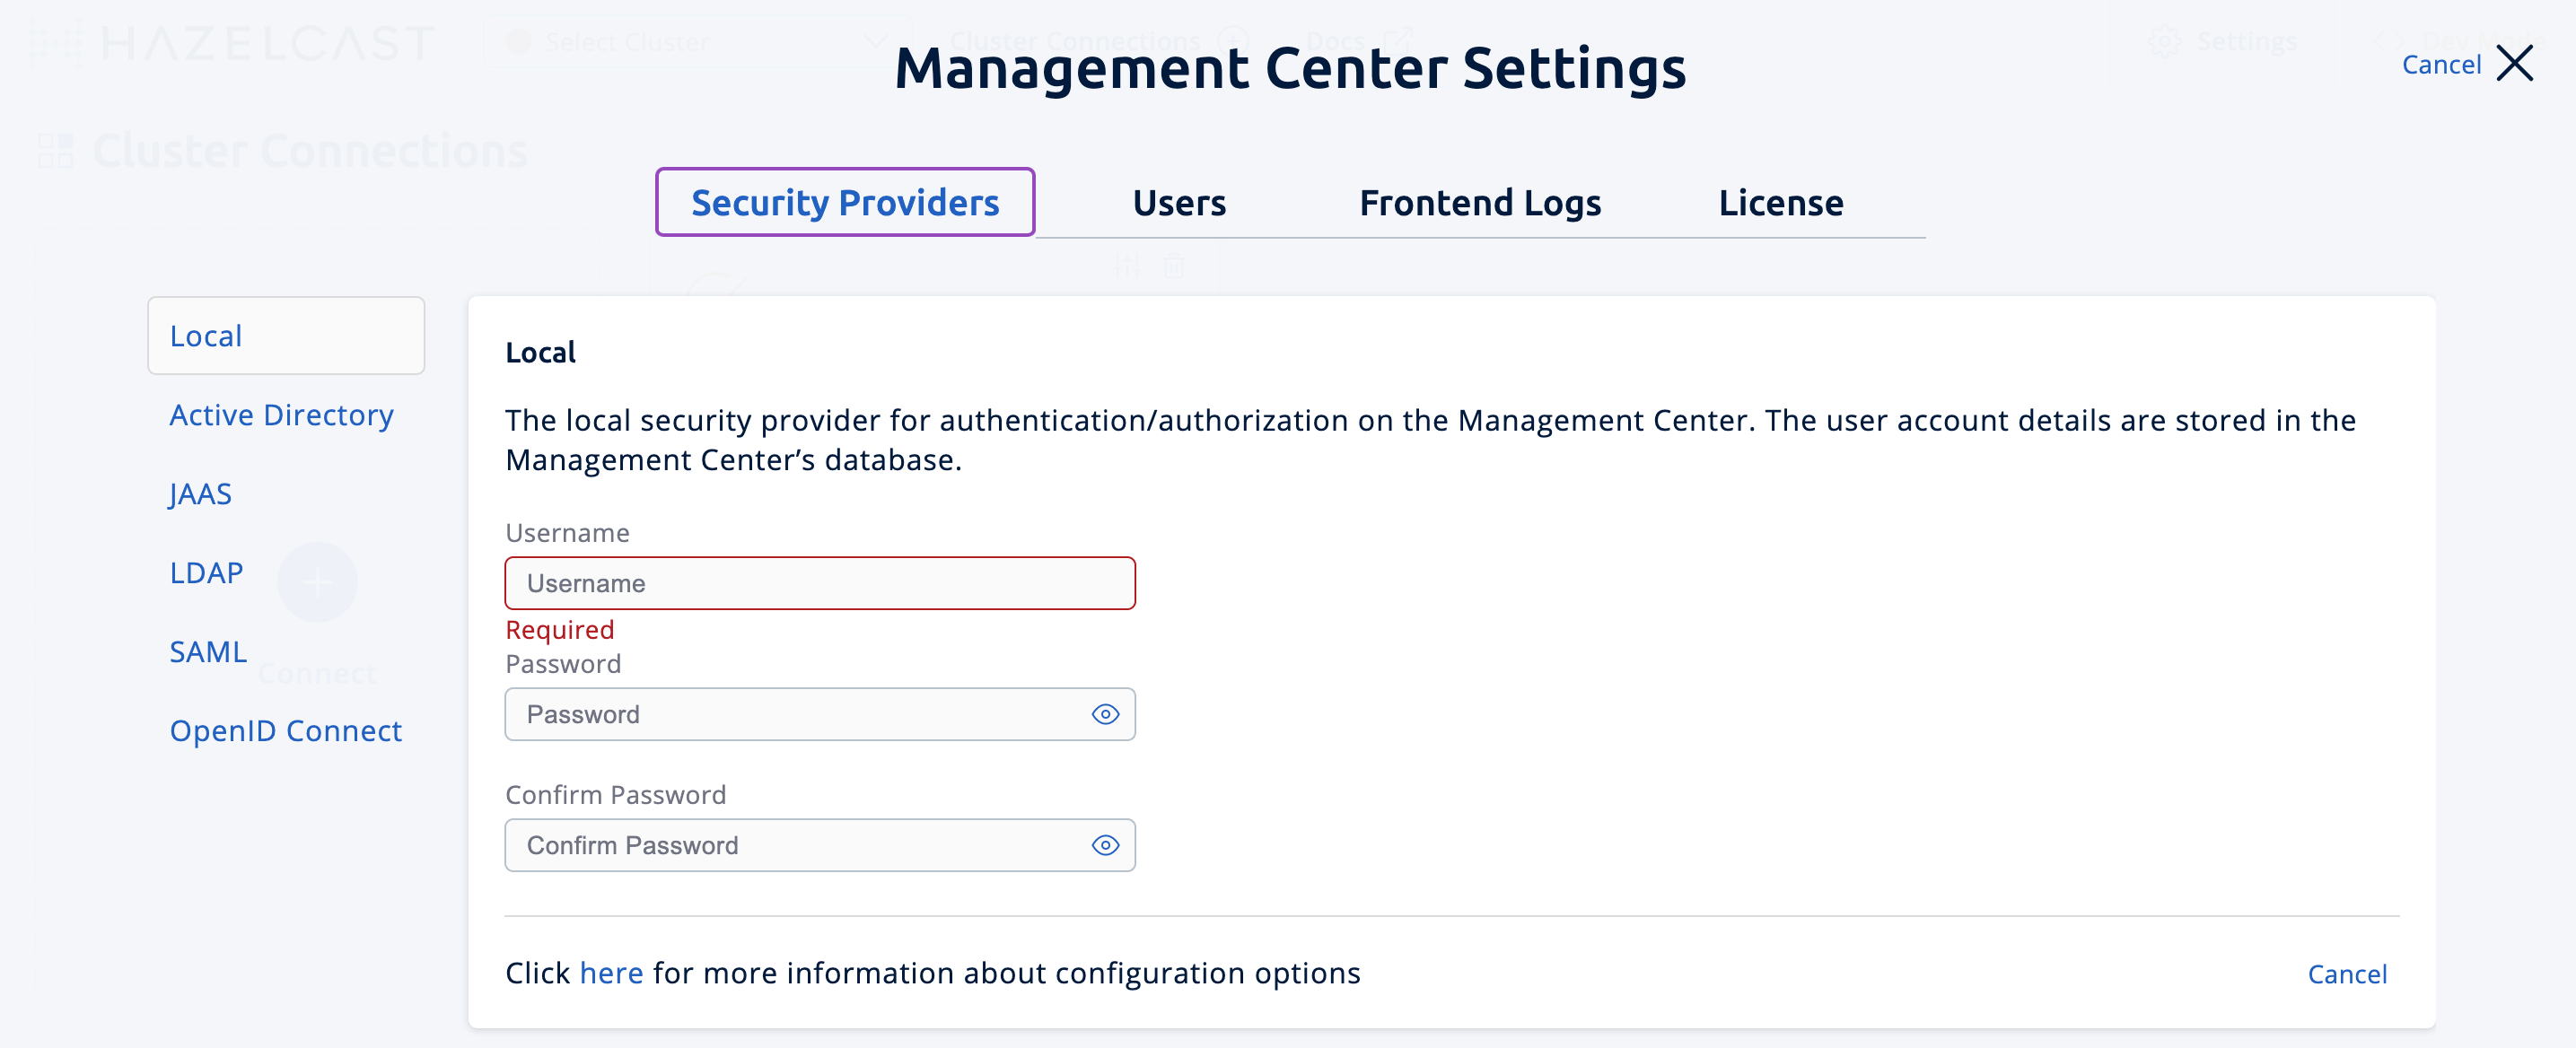 Security Providers tab in Management Center settings